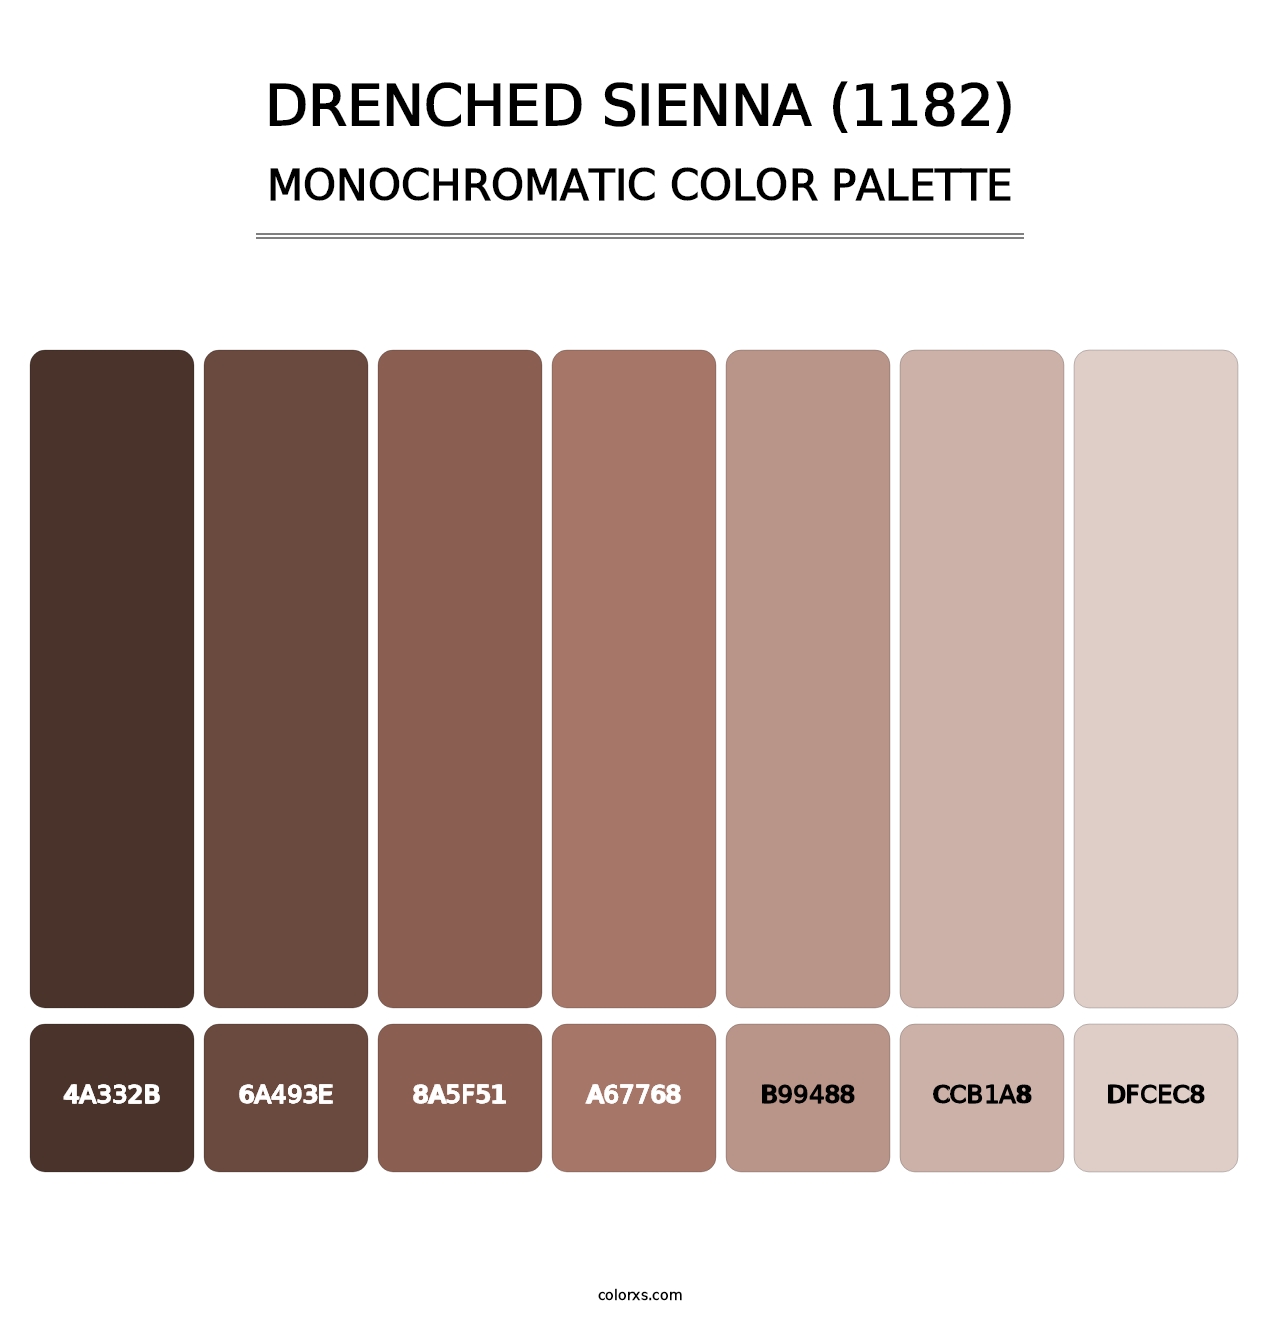 Drenched Sienna (1182) - Monochromatic Color Palette